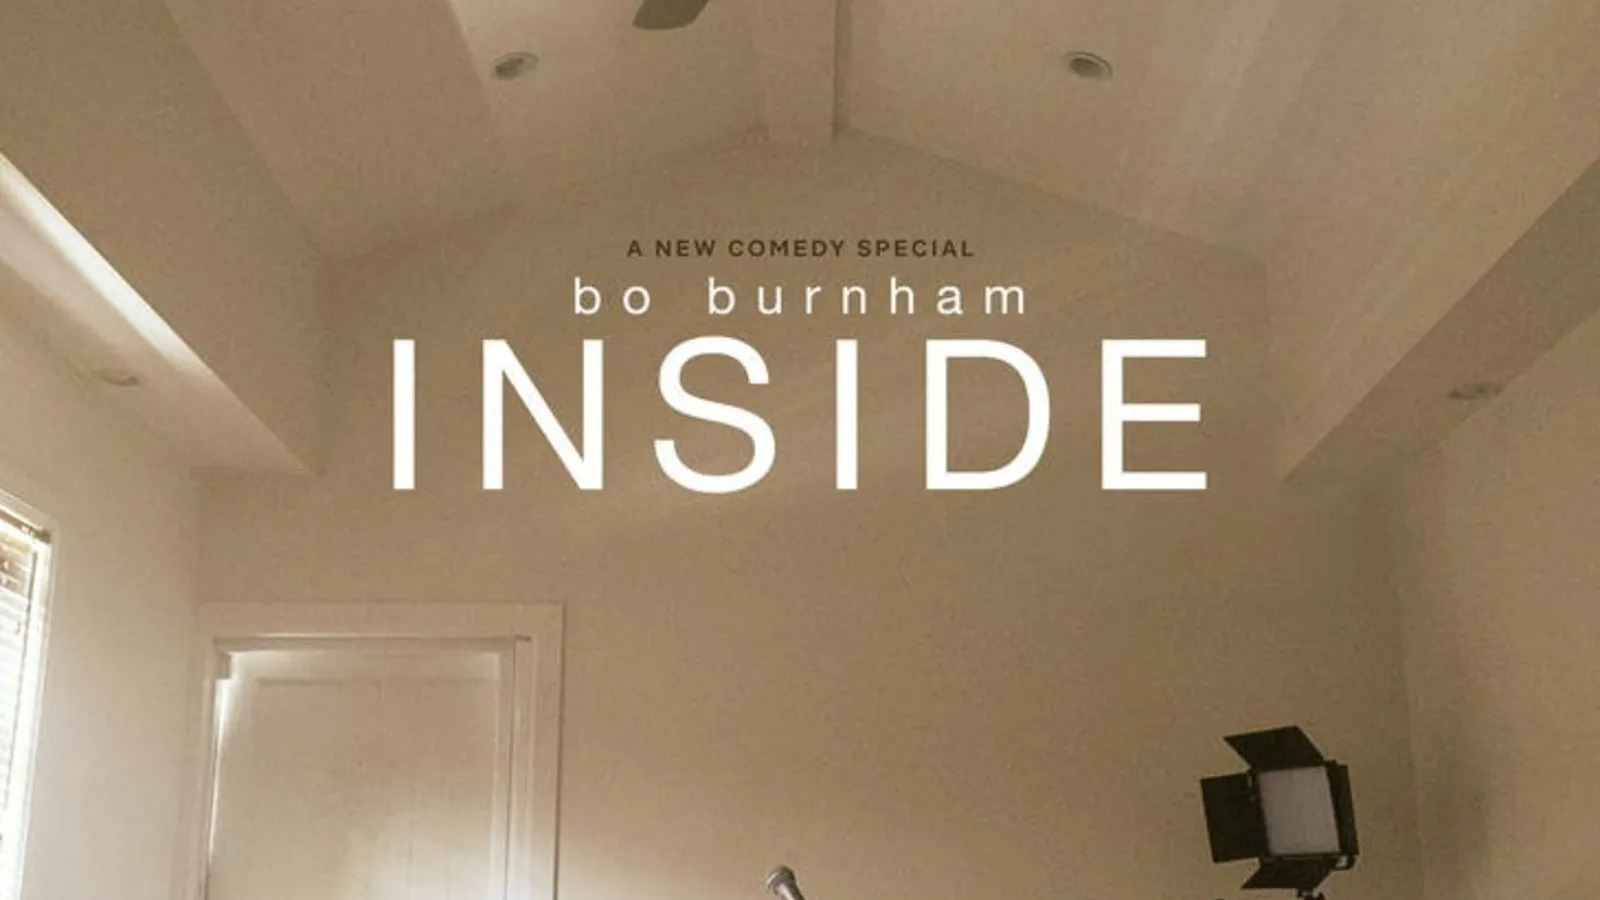 42-facts-about-the-movie-bo-burnham-inside